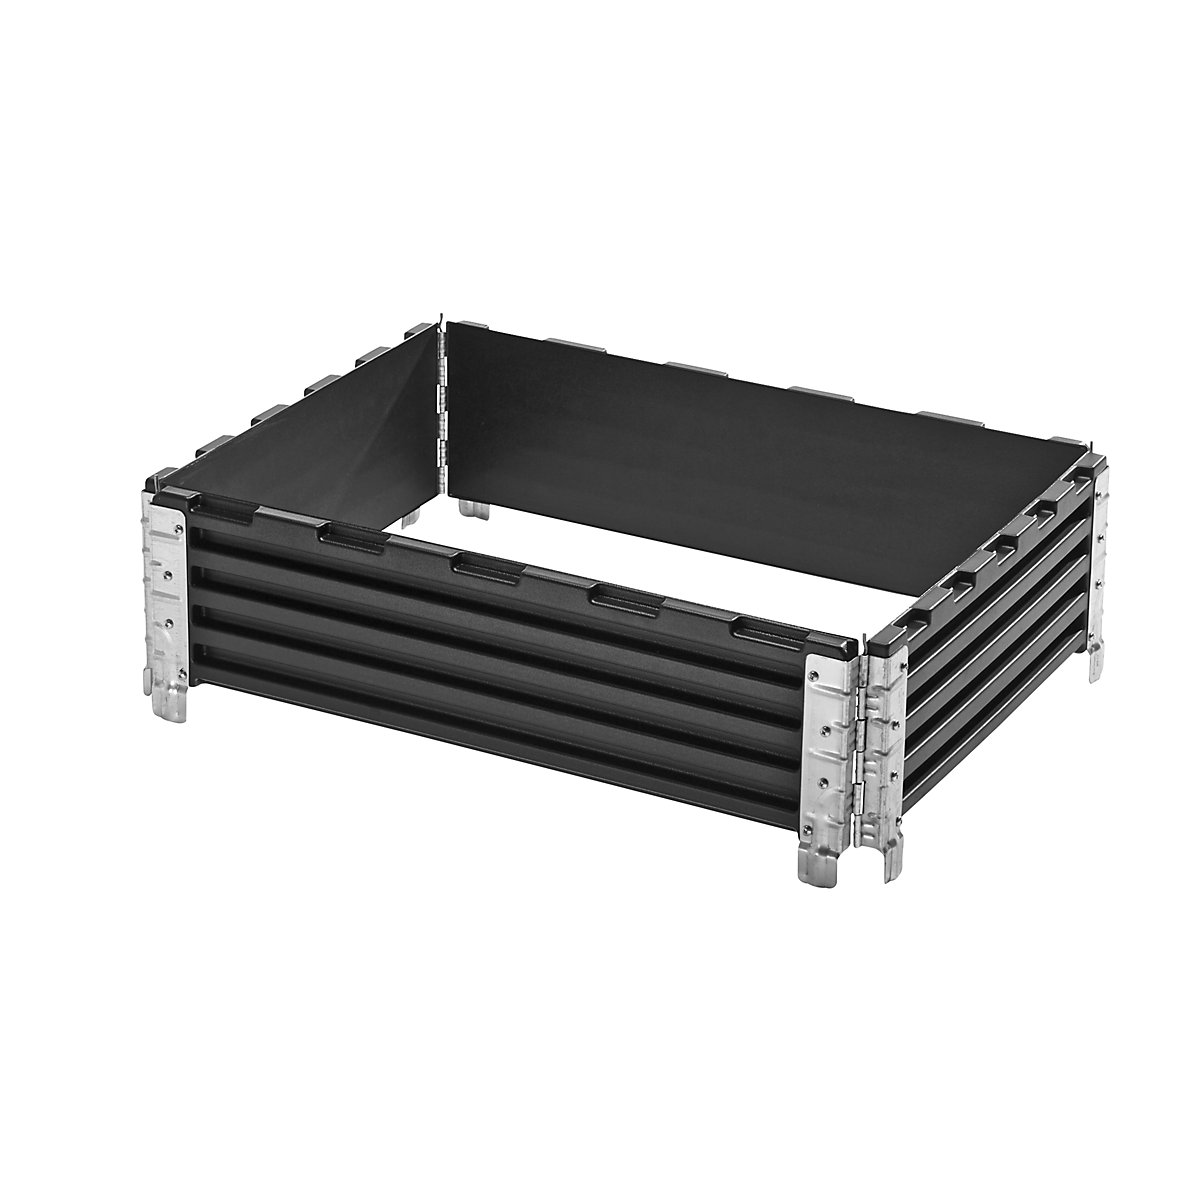 Plastic pallet collar, pack of 2, for 600 x 400 mm pallet, diagonally folding, with 4 hinges, 10+ packs